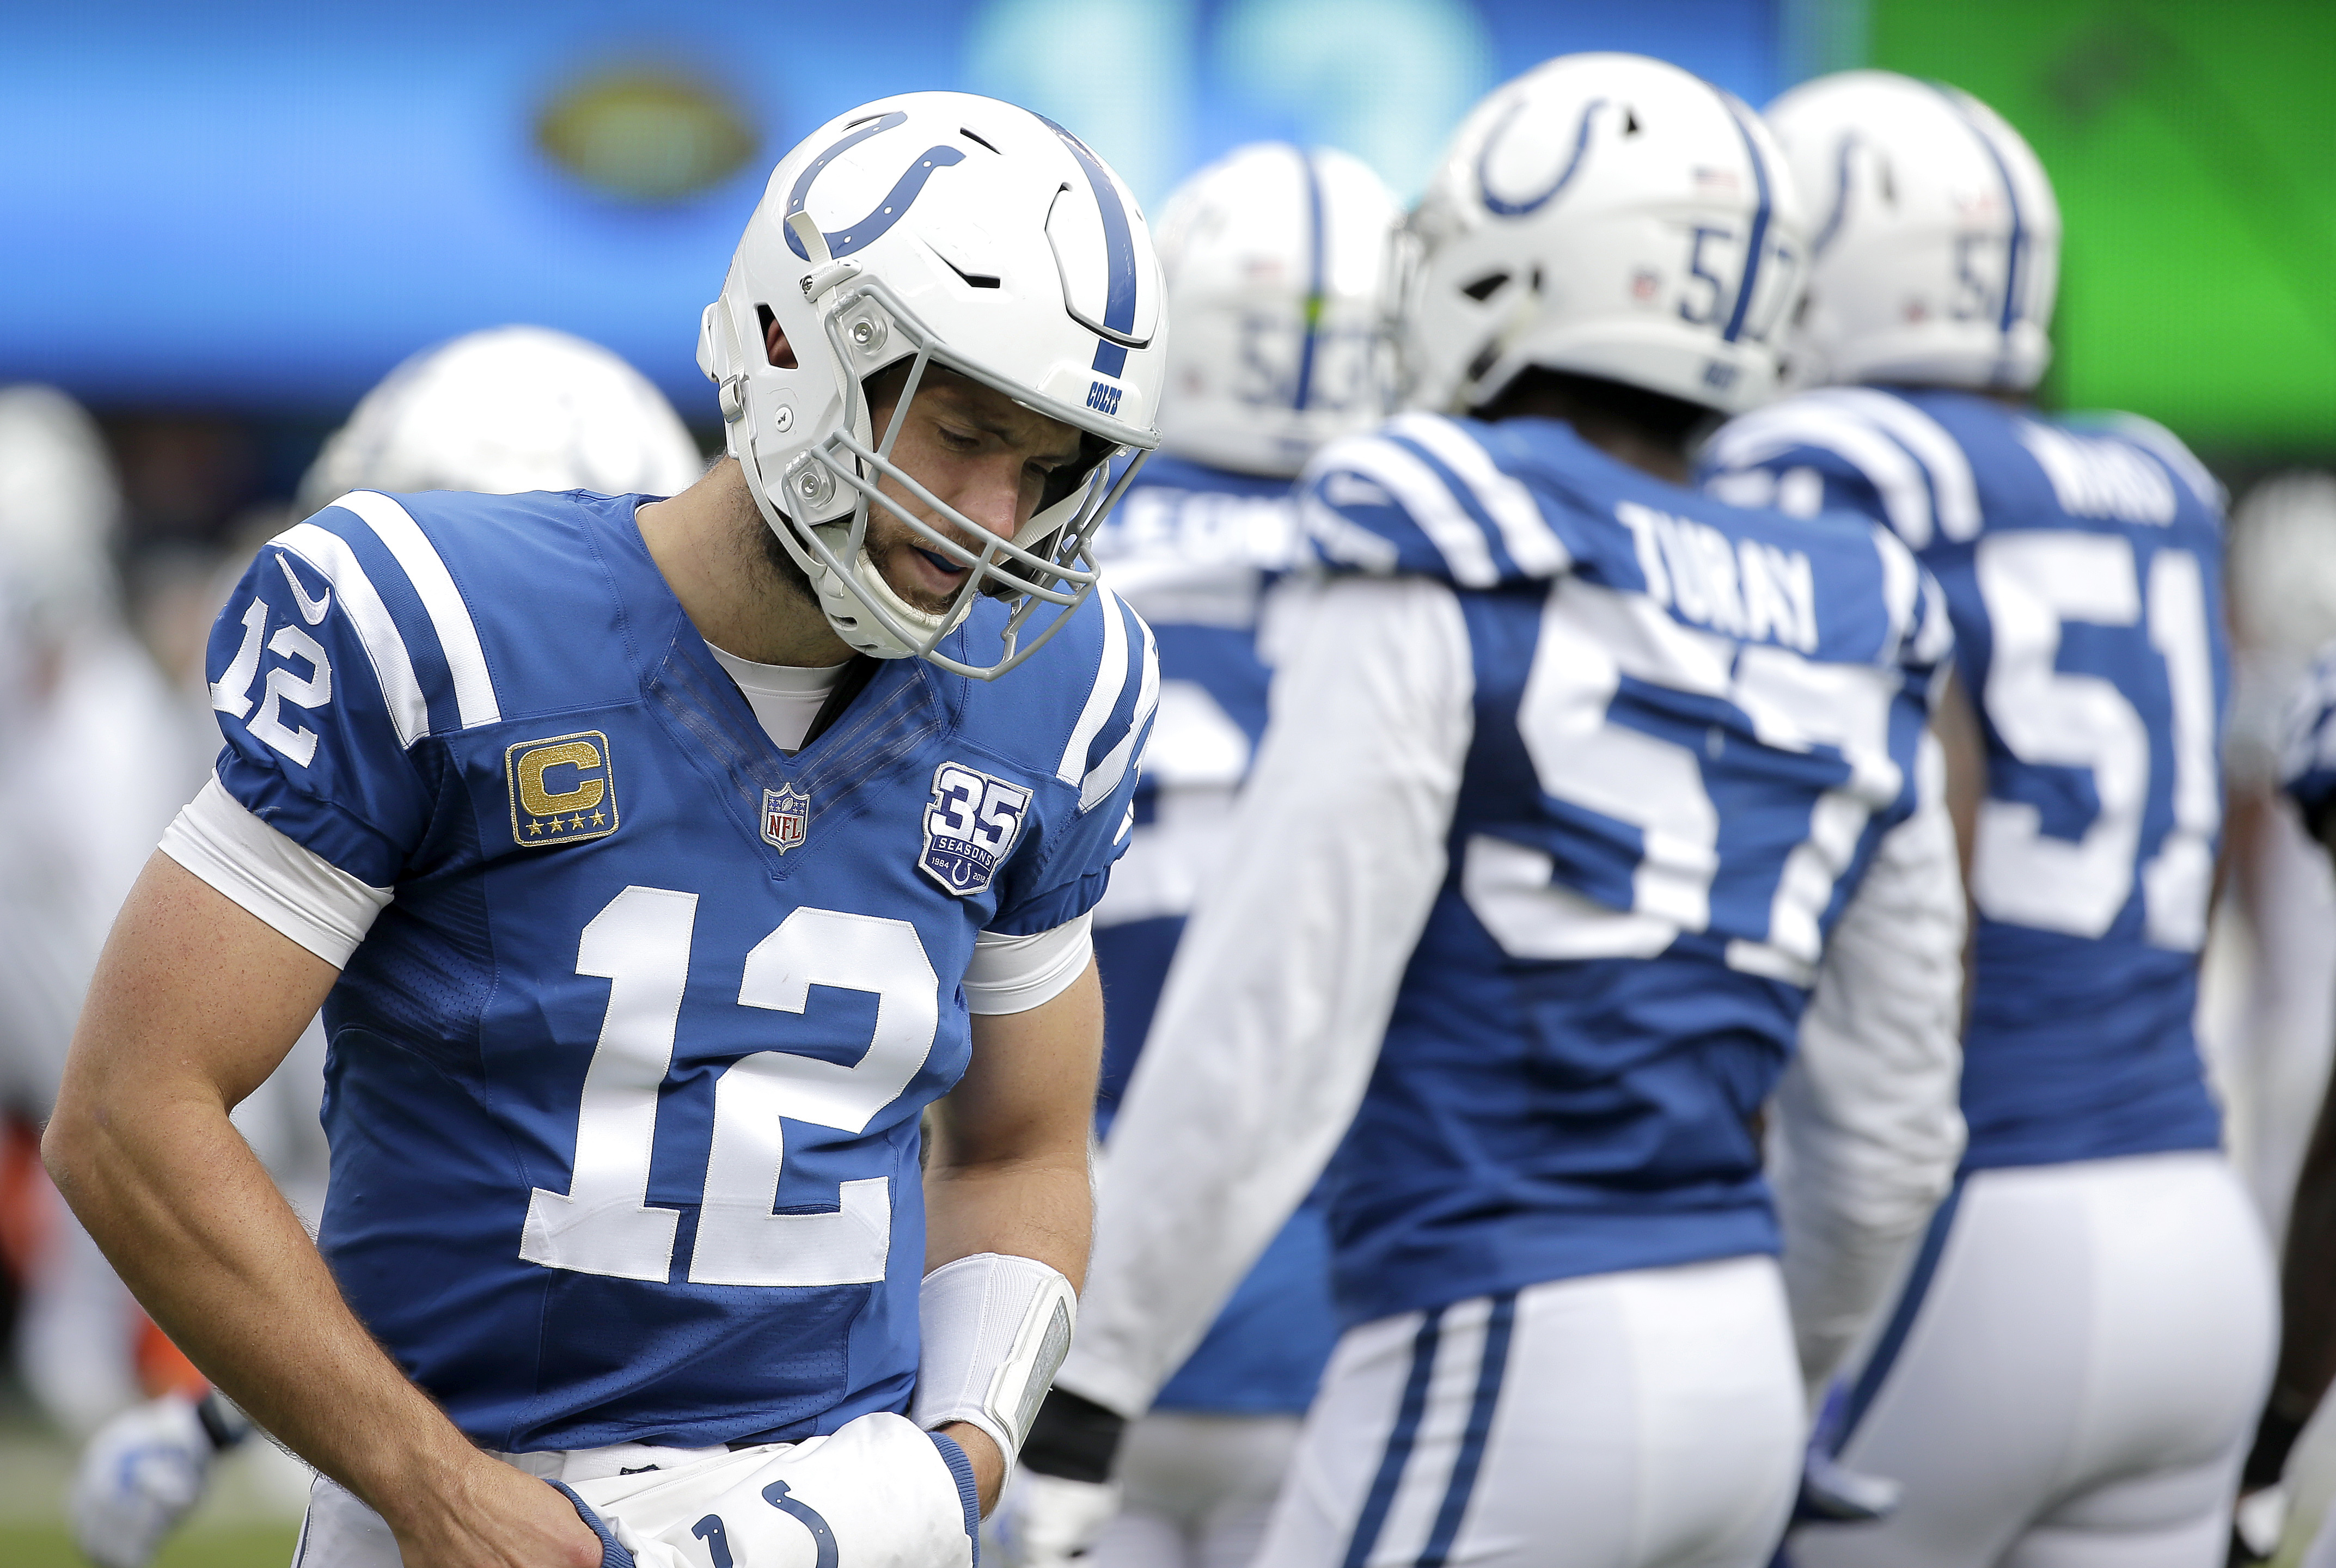 Luck, Colts bemoan mistakes in sloppy loss to Jets